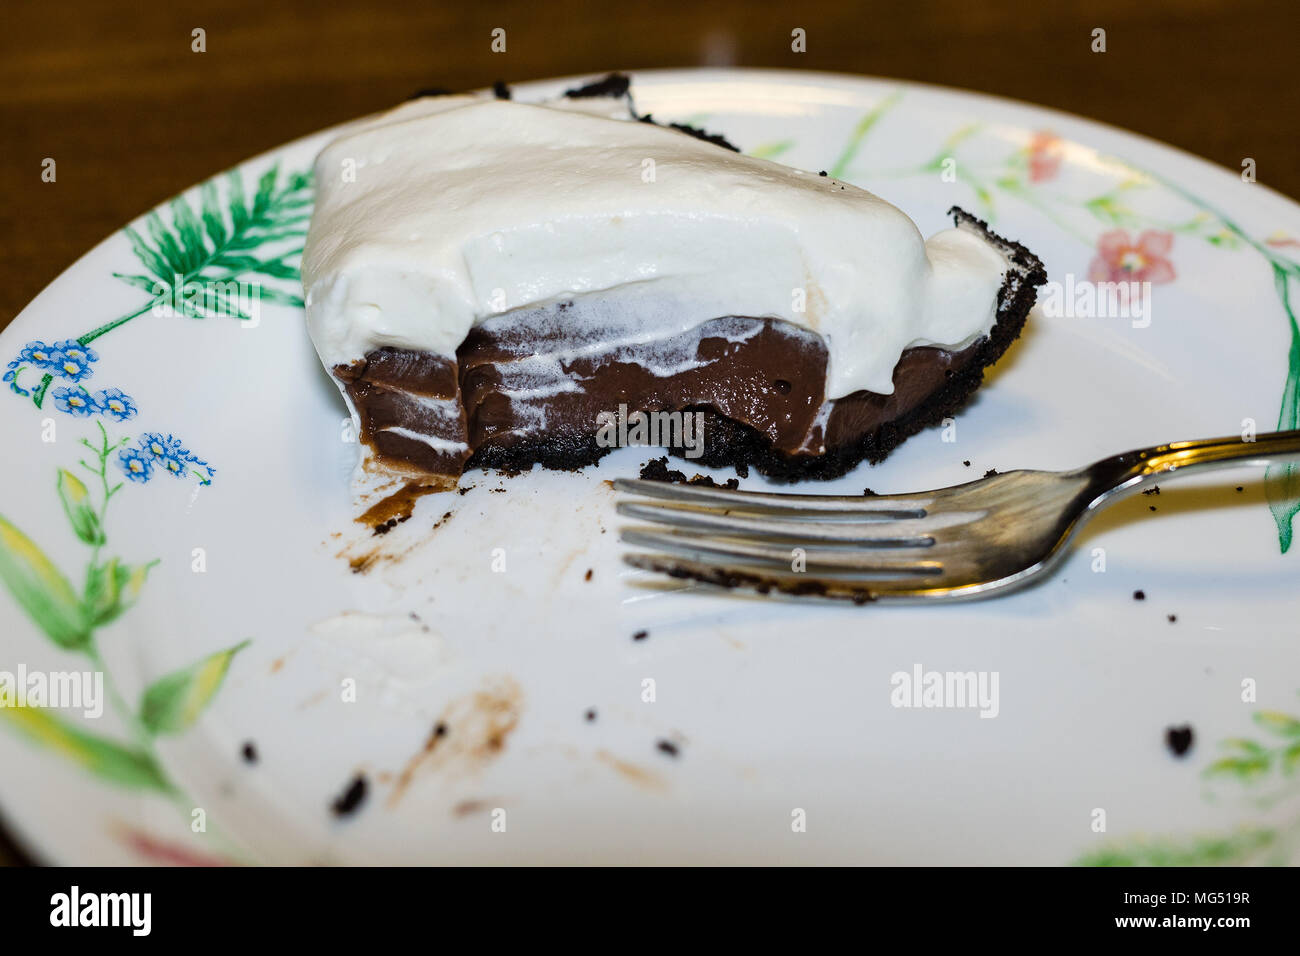 eating some delicious homemade chocolate pie for desert Stock Photo